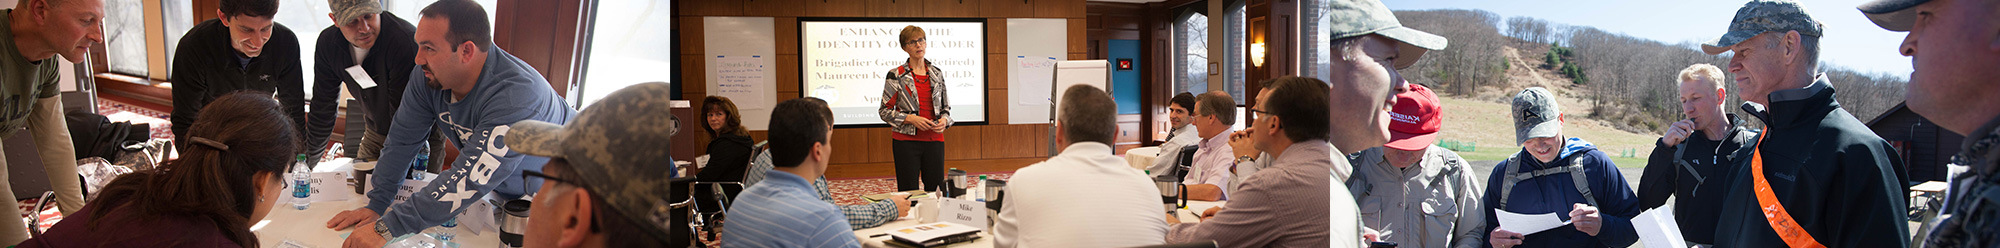 WOMEN LEADING FROM THE FRONT LINES: CORE LEADERSHIP PRINCIPLES FROM THE ARMY AND WEST POINT